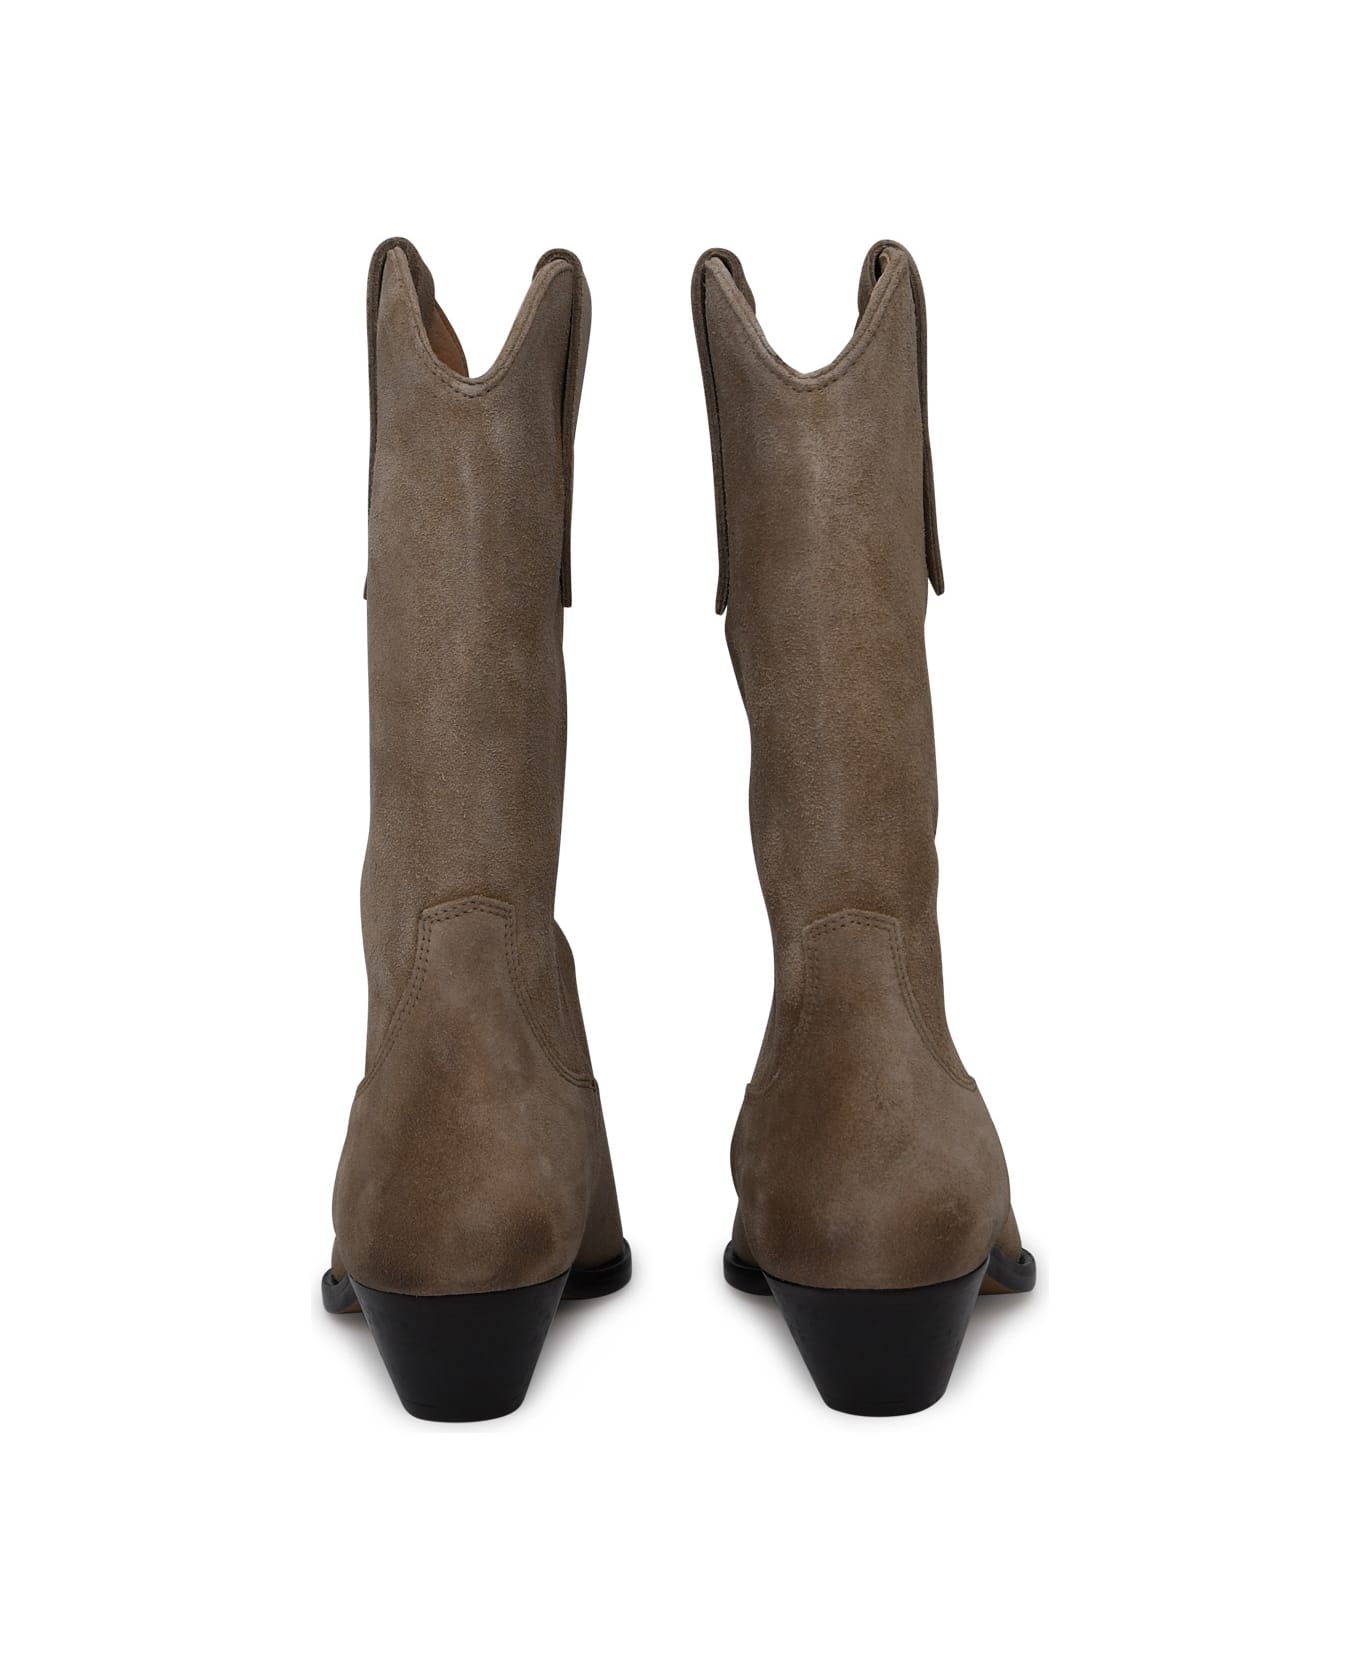 Isabel Marant Duerto Cowboy Boots - Taupe